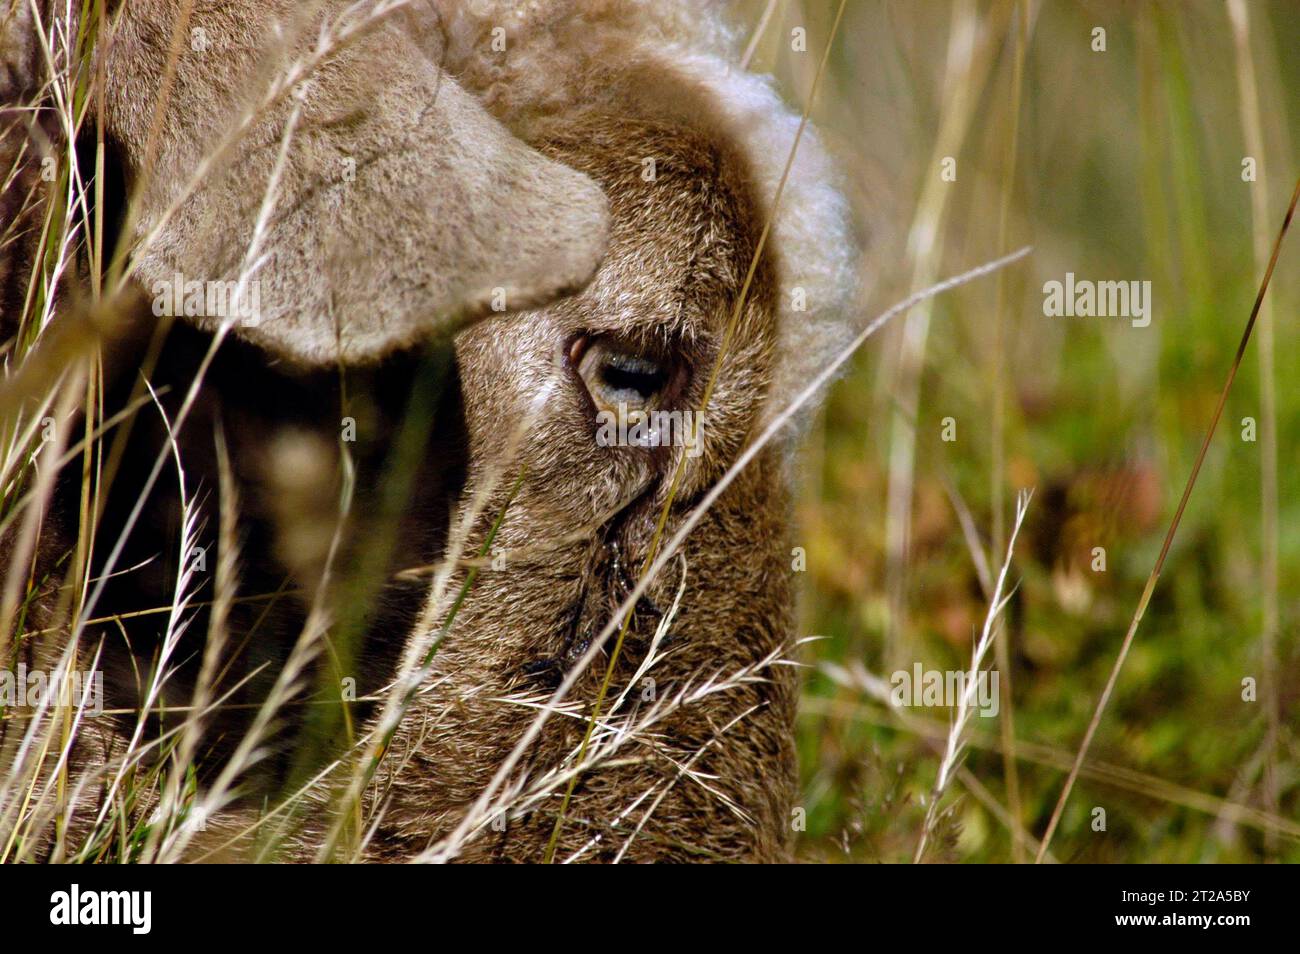 Sheep are important animals in agriculture sheep and their environment Credit: Imago/Alamy Live News Stock Photo